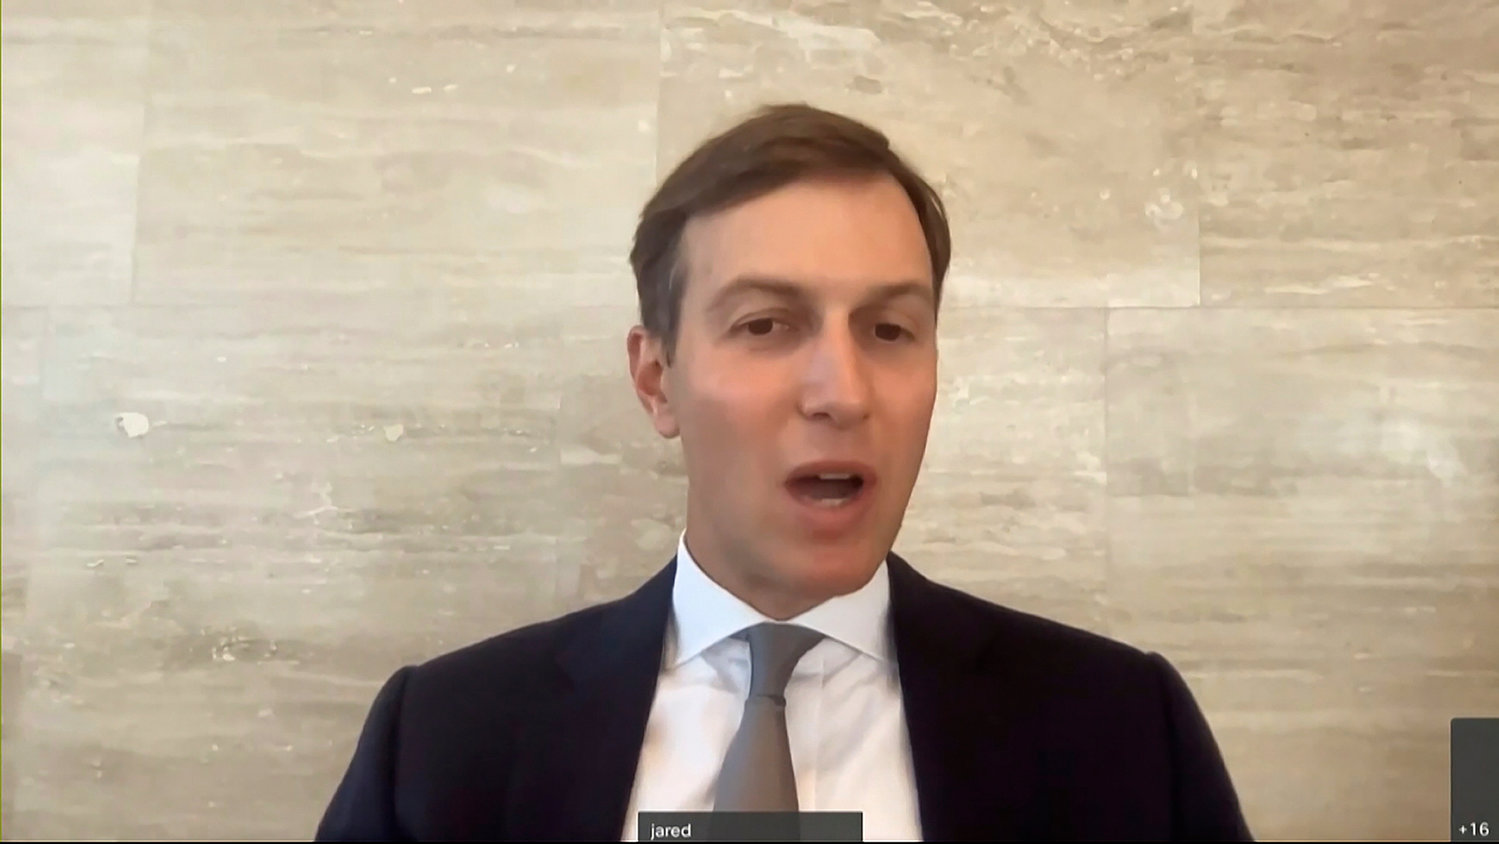 In this image from video released by the House Select Committee, former White House senior adviser Jared Kushner is interviewed by the House select committee investigating the Jan. 6 attack on the U.S. Capitol, displayed at the hearing Thursday, June 9, 2022, on Capitol Hill in Washington. (House Select Committee via AP)